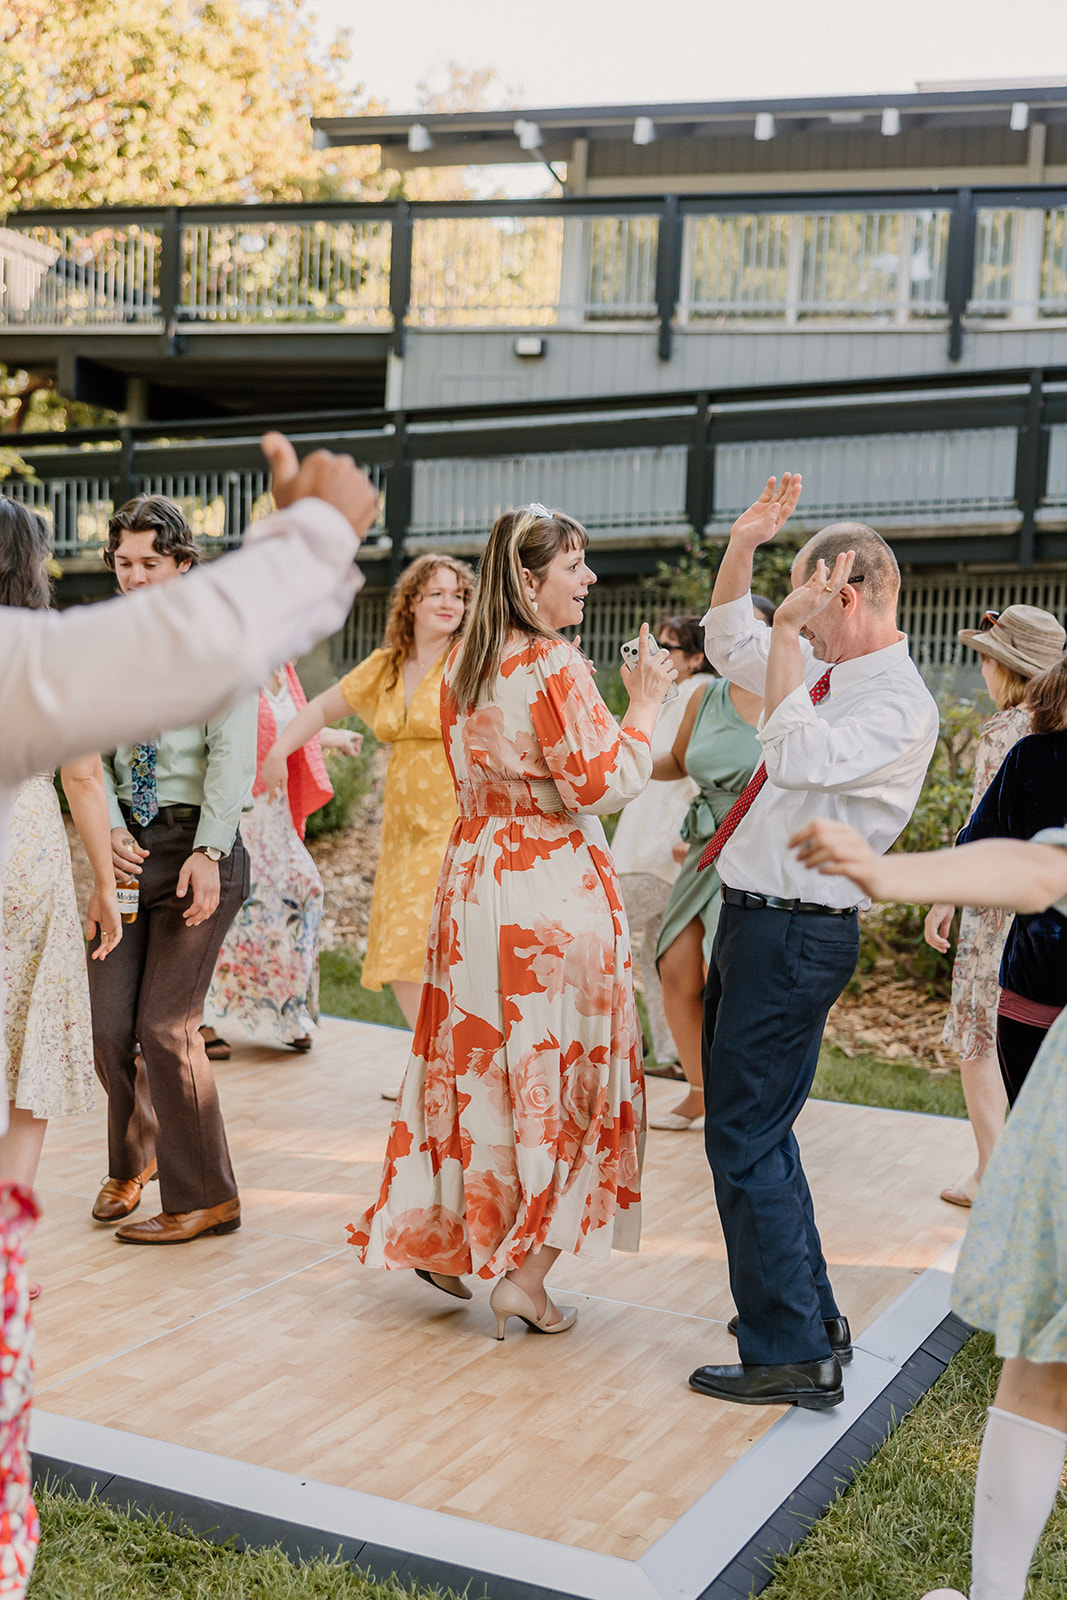 A group of people, including adults and children, are dancing outdoors on a wooden platform. at a wedding at the gardens at heather farms